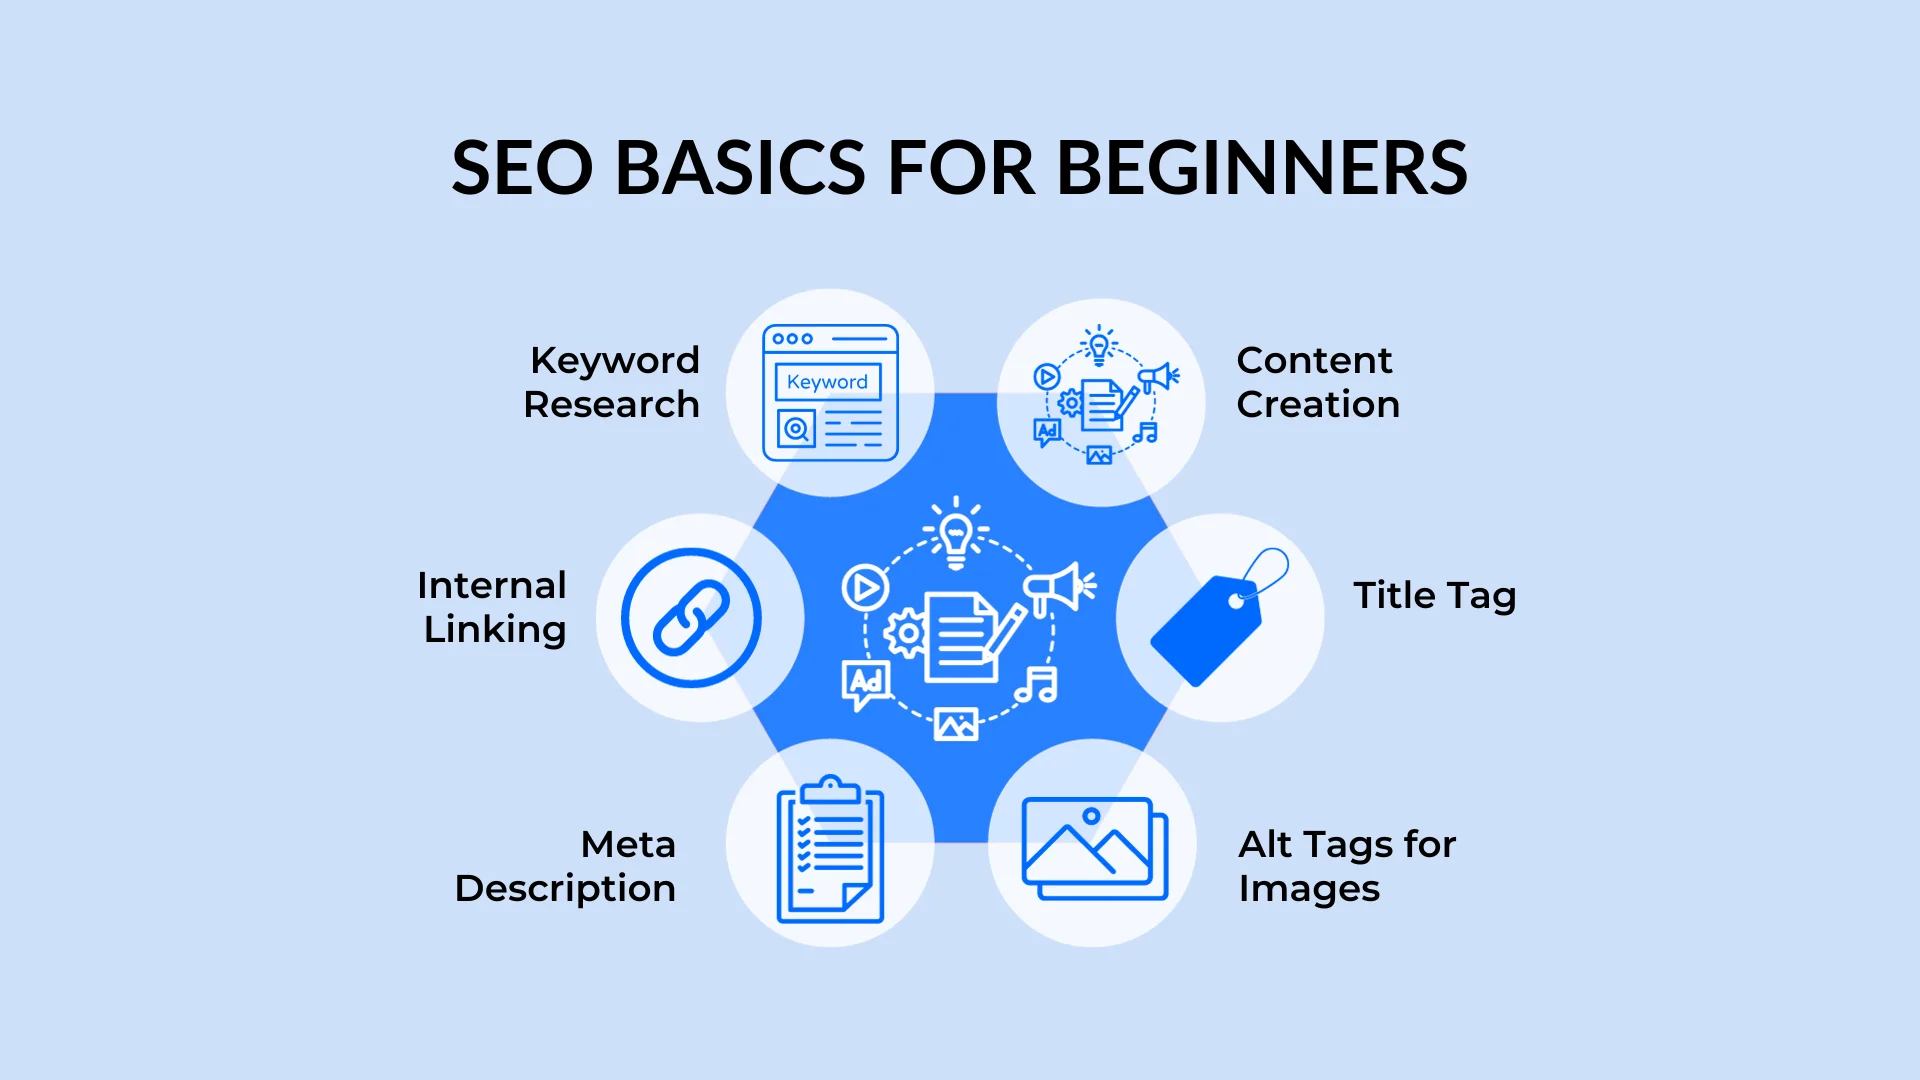 An infographic on the six seo basics for beginners